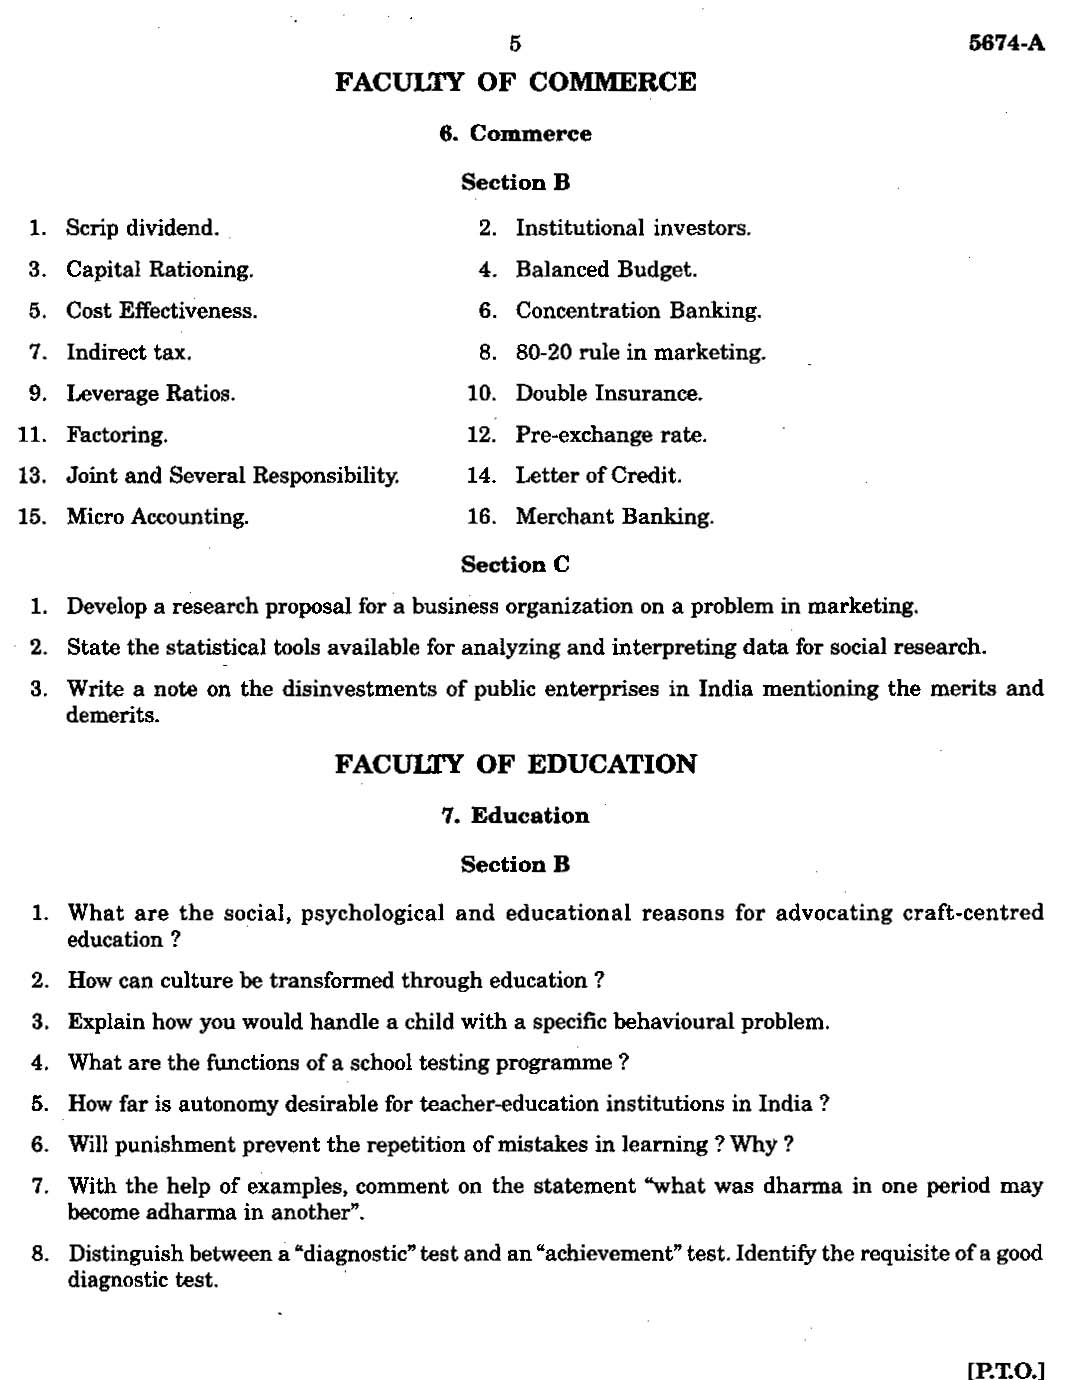 phd entrance exam question paper for computer science